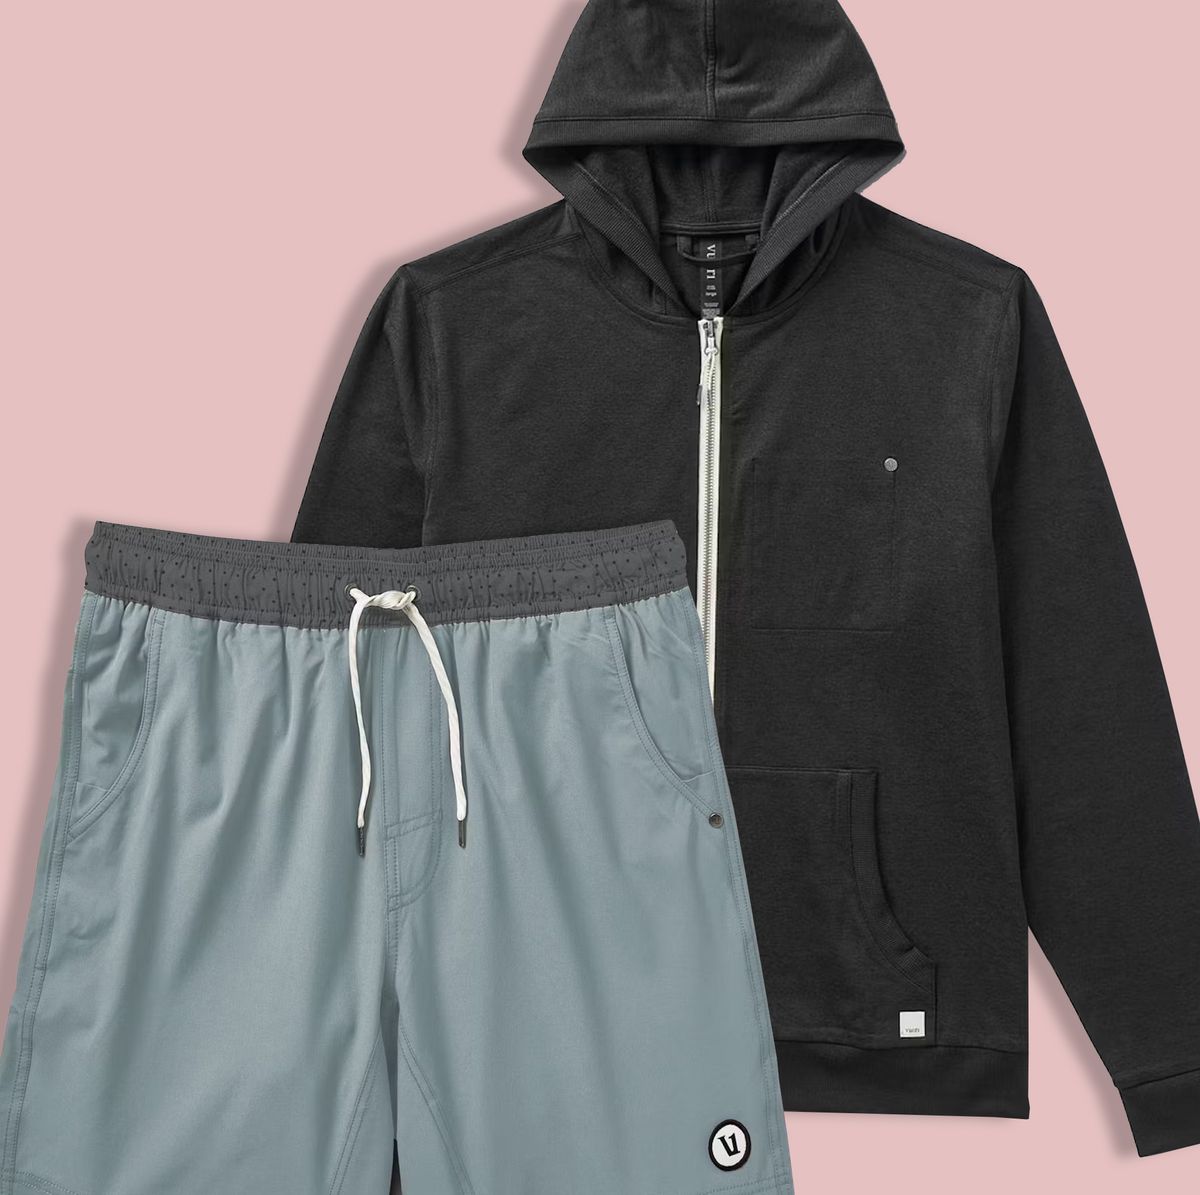 Kore Collection: Athletic Shorts, Joggers & Jackets